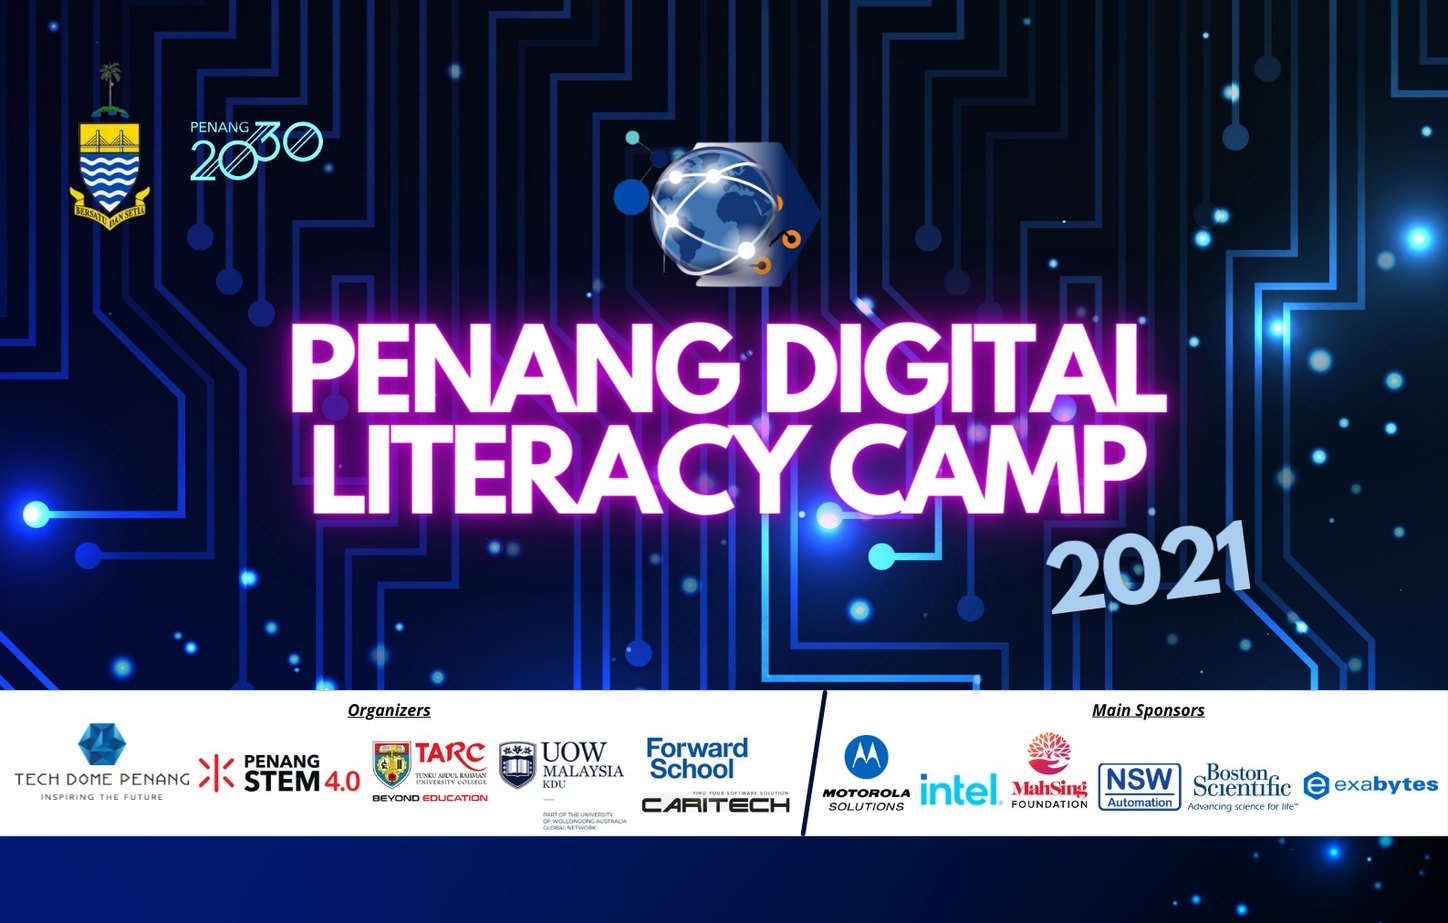 Penang Digital Literacy Camp hosted by Tech Dome Penang